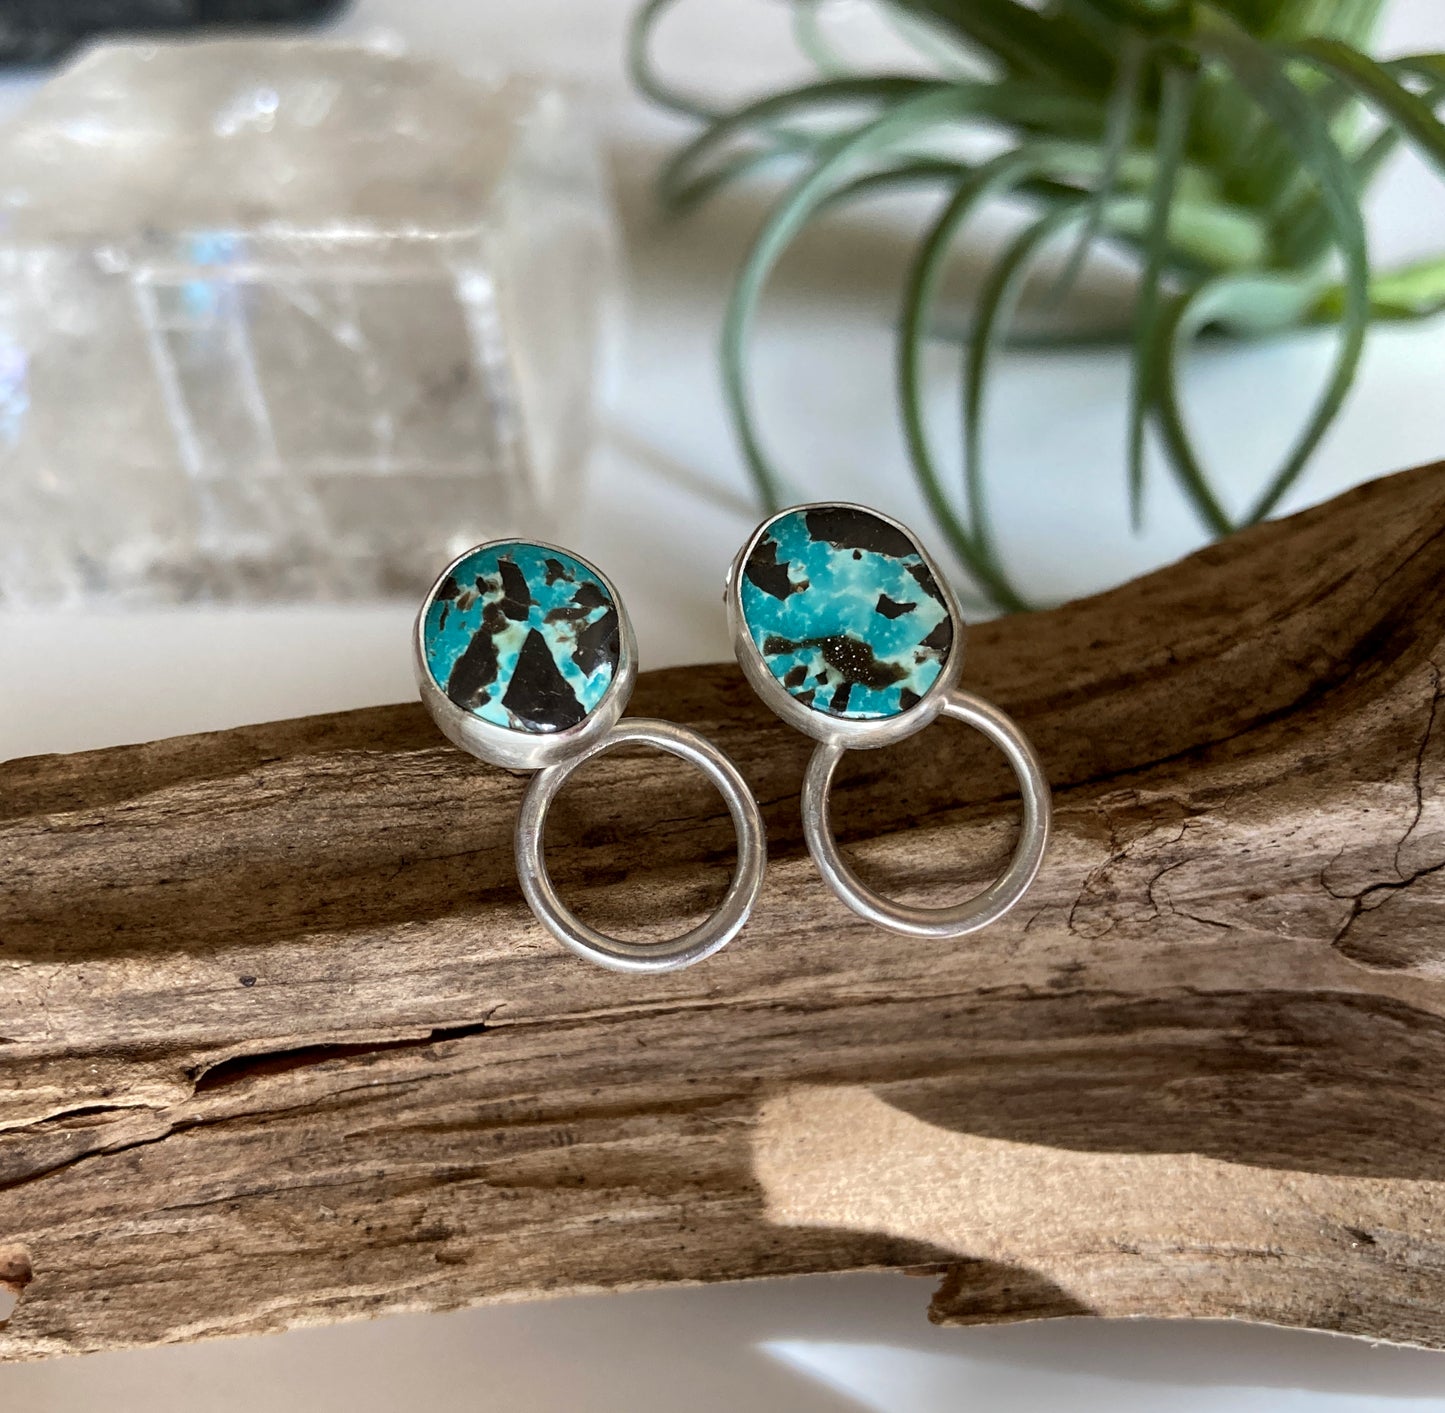 Turquoise & Sterling Silver Stud Earrings with Petite Hoop Ear Jackets | Carico Lake Turquoise